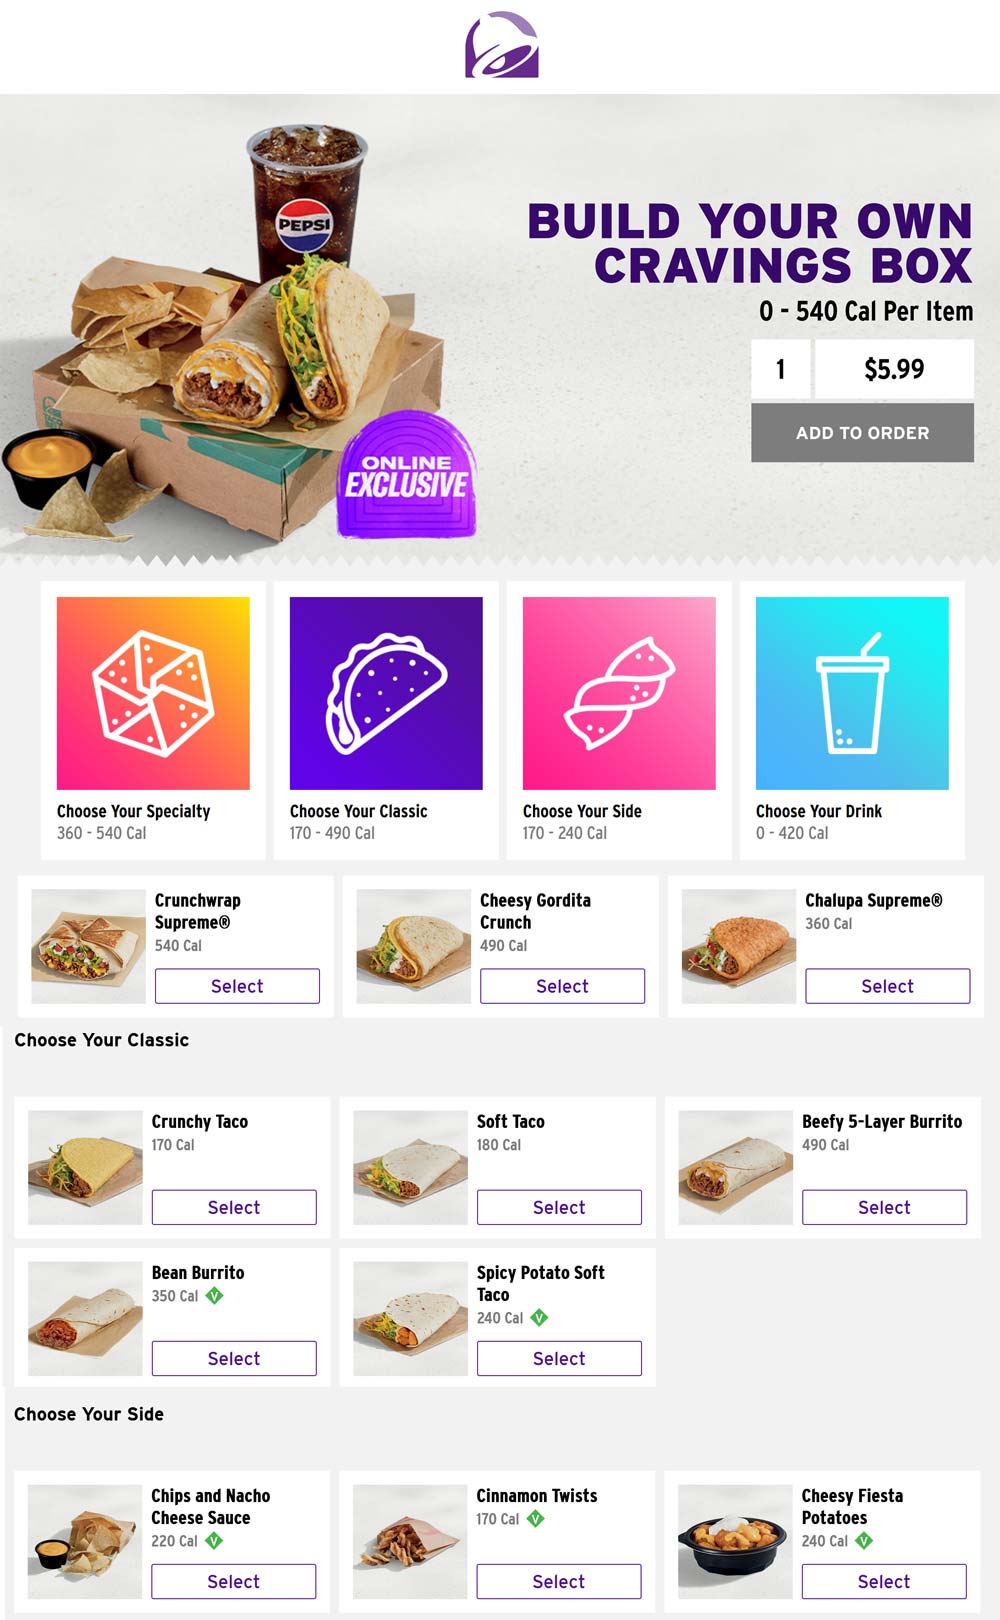 Taco Bell restaurants Coupon  Entree + taco or burrito + side + drink = $6 cravings box online at Taco Bell #tacobell 